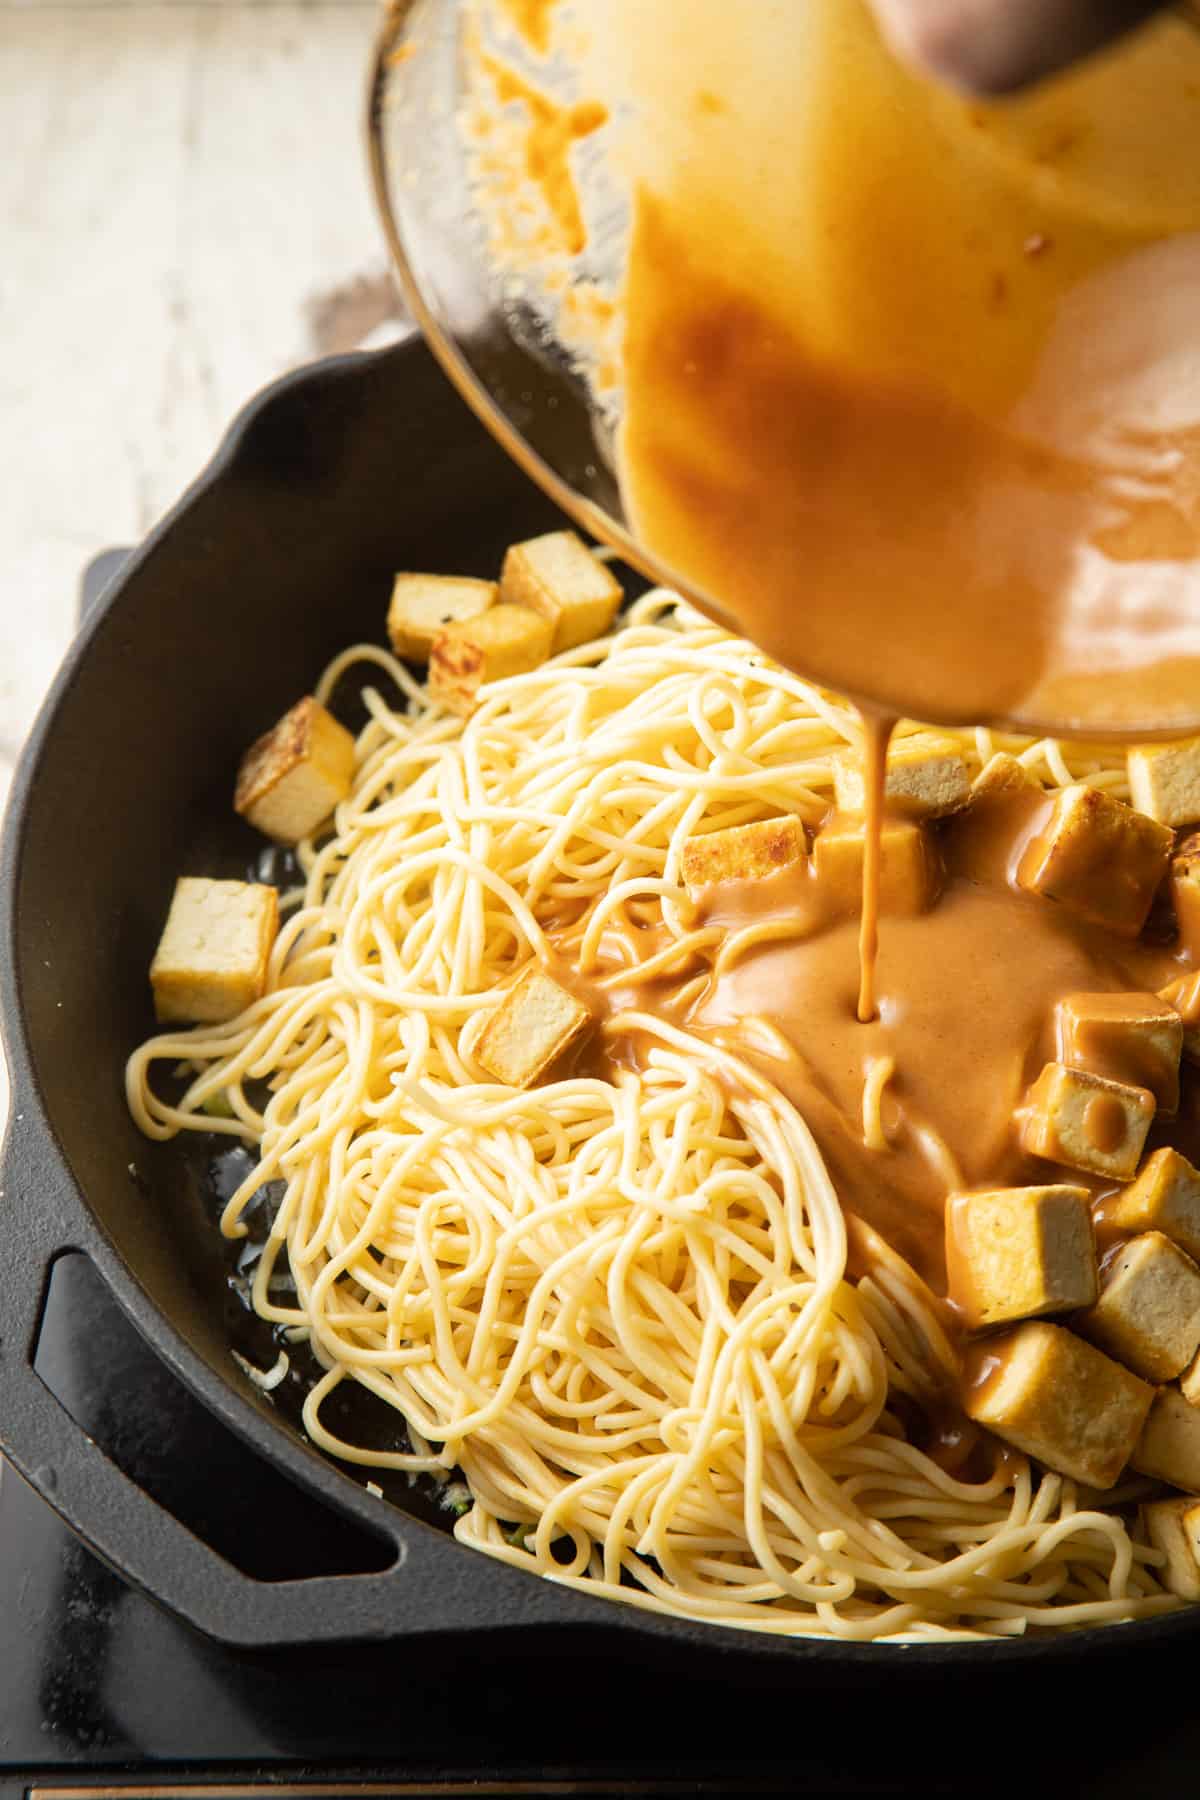 Peanut sauce being poured over noodles and tofu in a skillet.